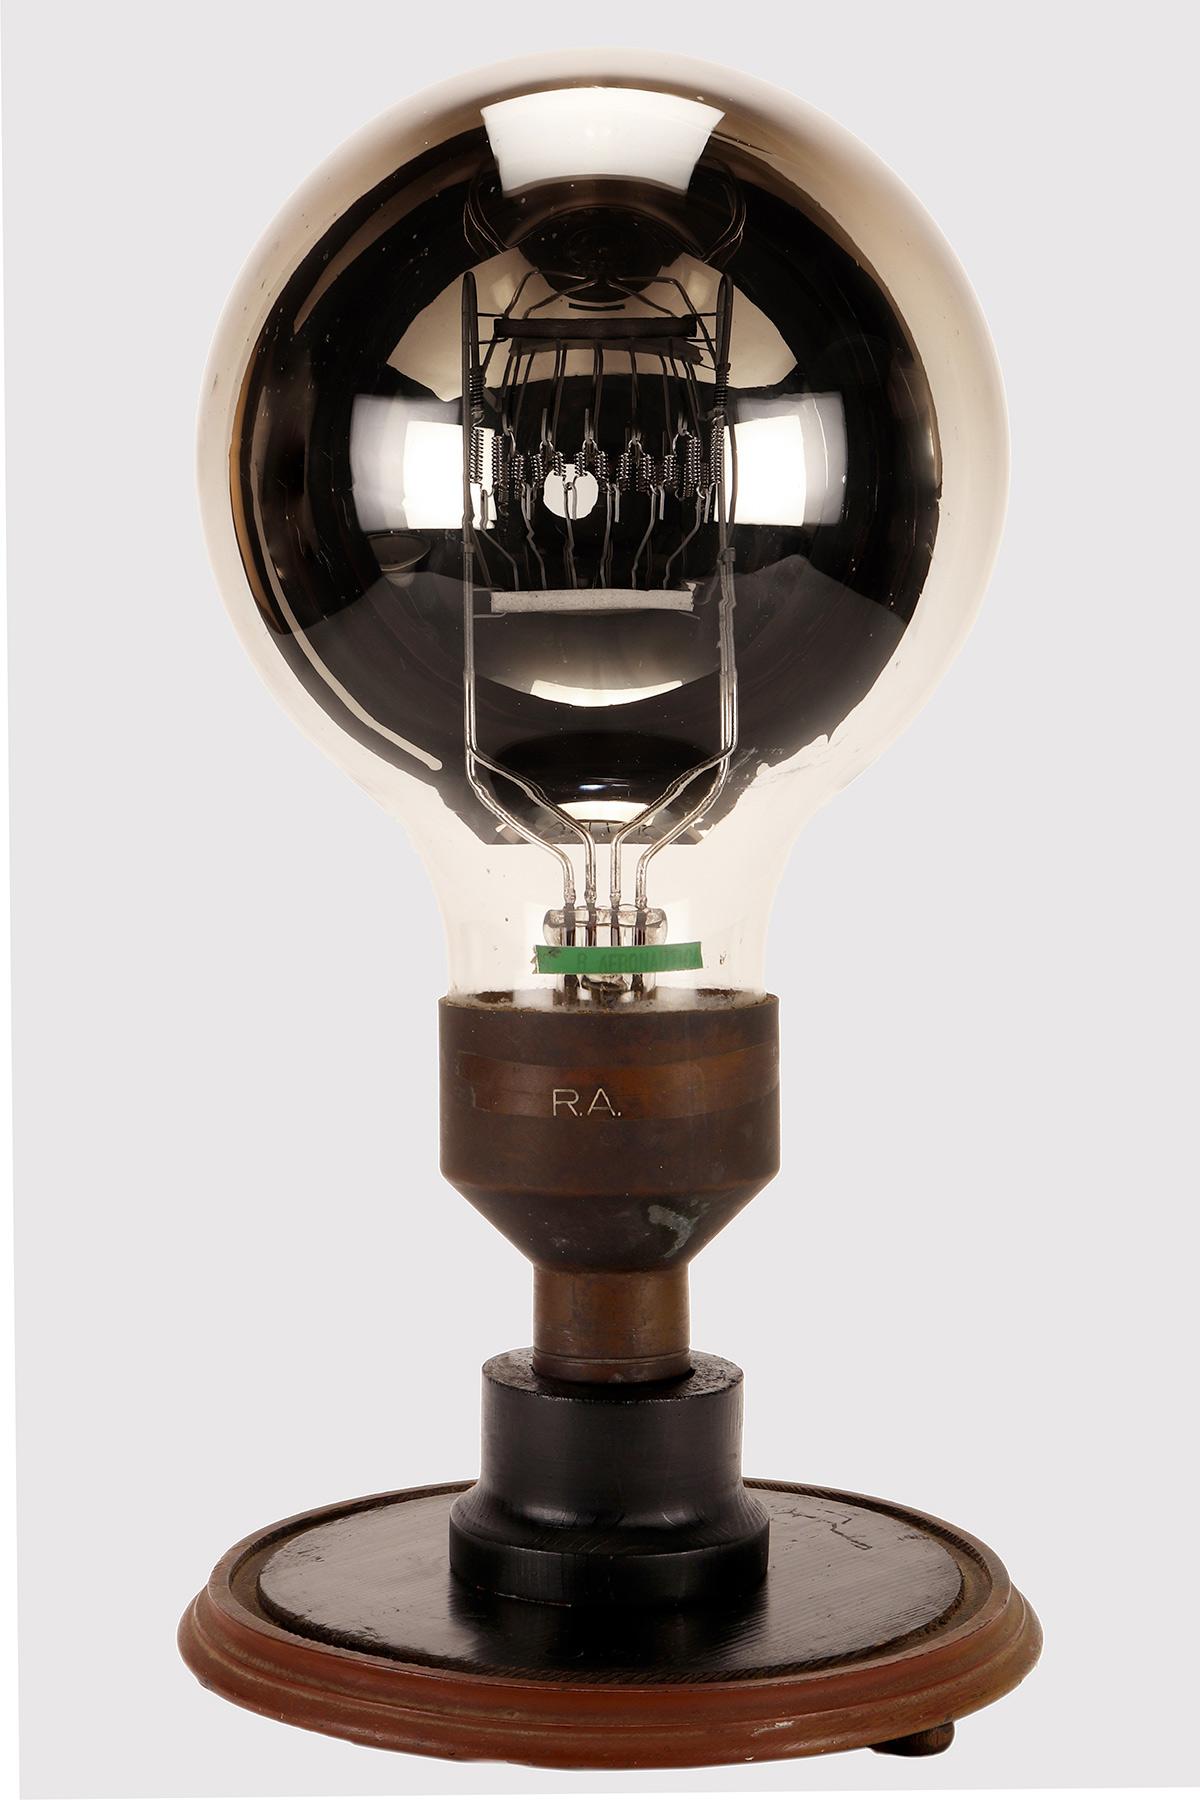 A Large airport light bulb of the RA (Regia Aereonautica).
Mounted on a round painted wooden base. Italy circa 1930.